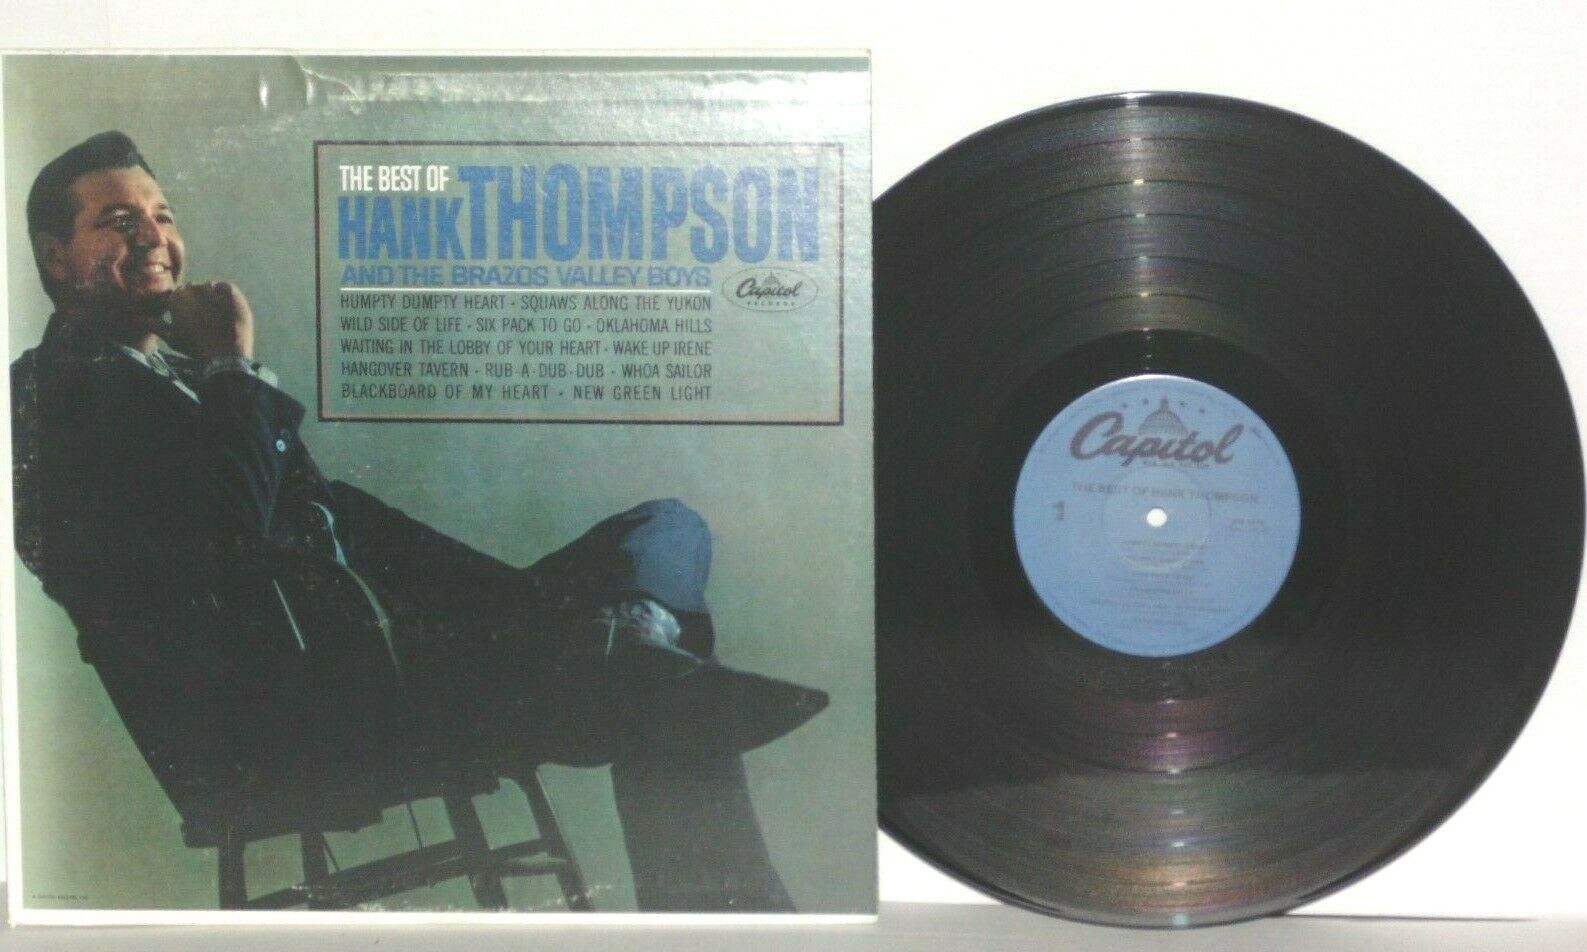 HANK THOMPSON The Best Of LP Brazos Valley Boys VG+ Capitol SM1878 Country